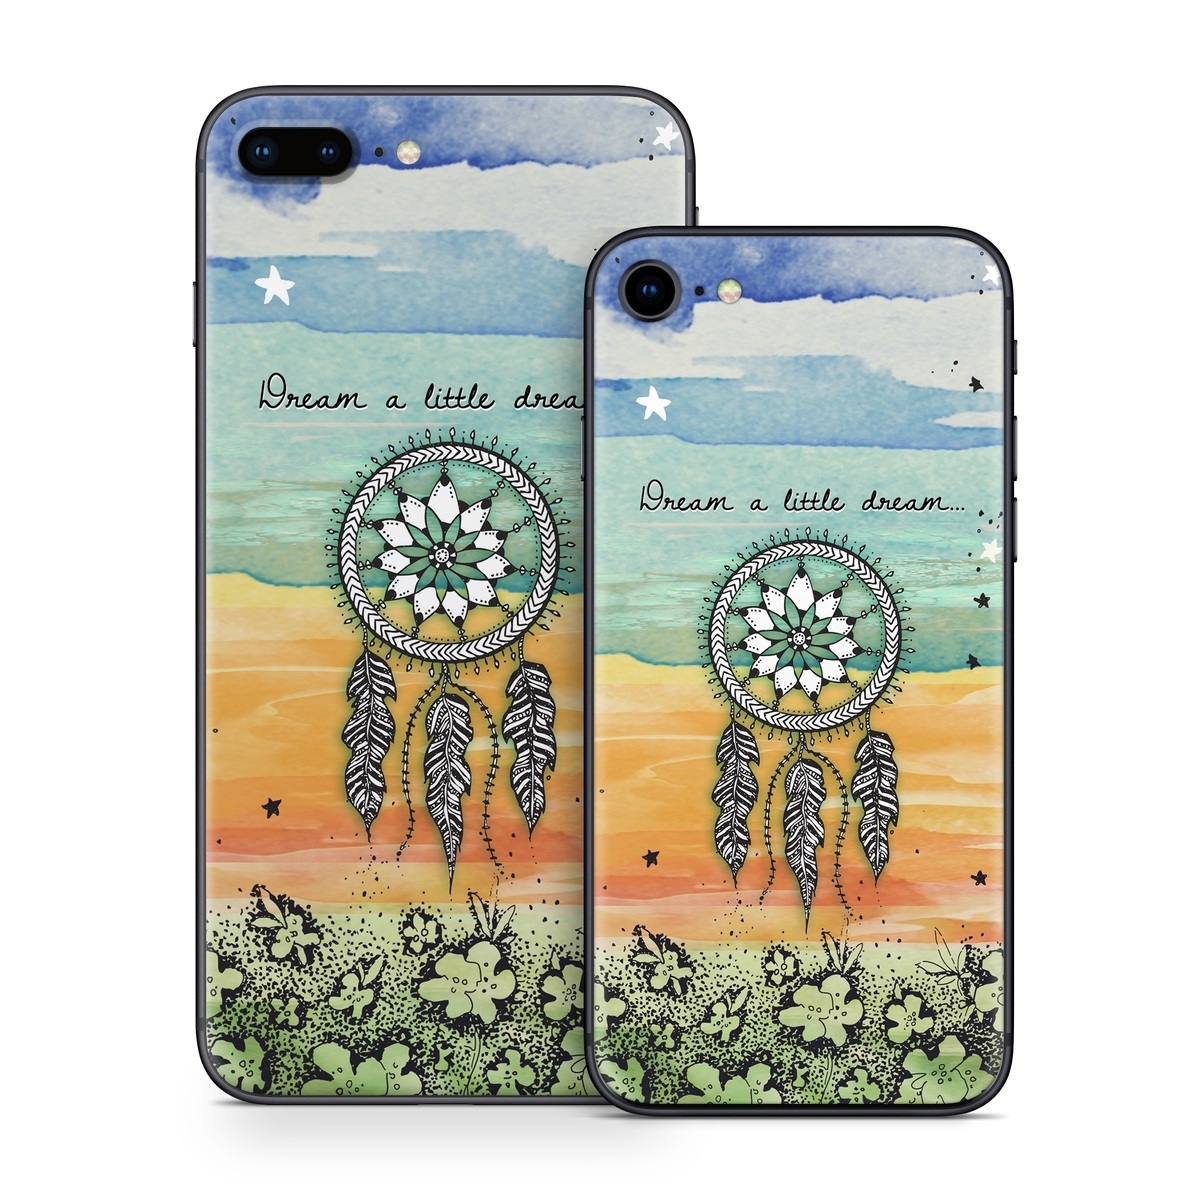 iPhone 8 Series Skin design of Text, Sky, Font, Illustration, Plant, Art, Wildflower, sunflower, Graphics, with blue, green, yellow, orange, black colors